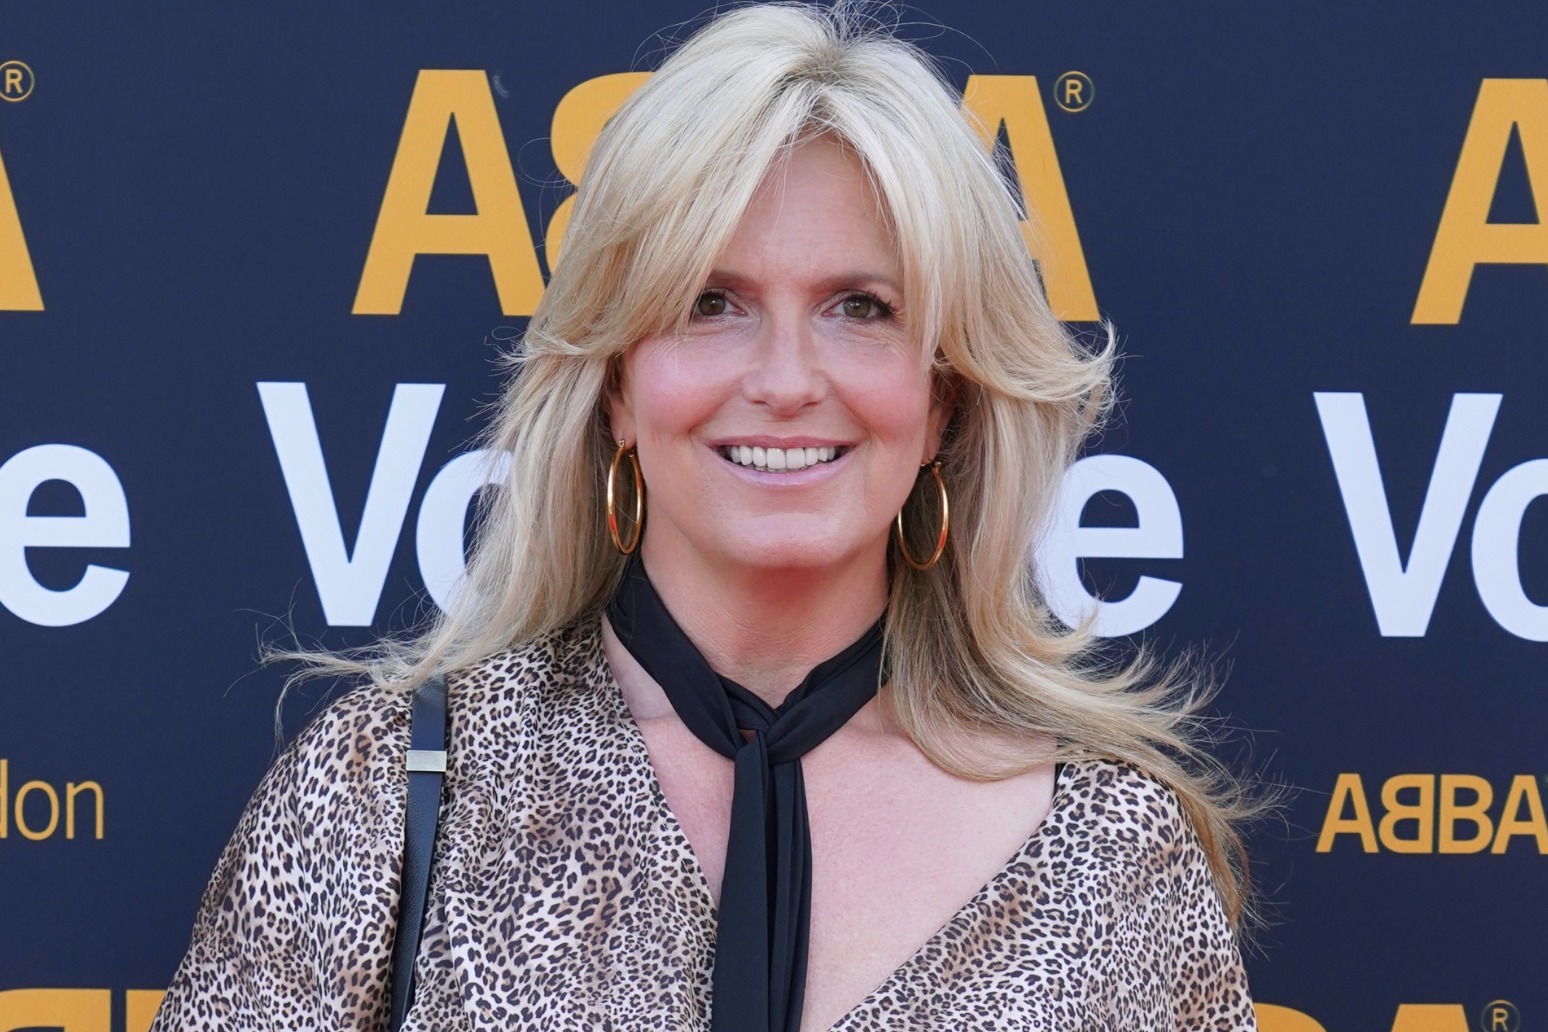 Penny Lancaster among famous faces fronting menopause awareness campaign 